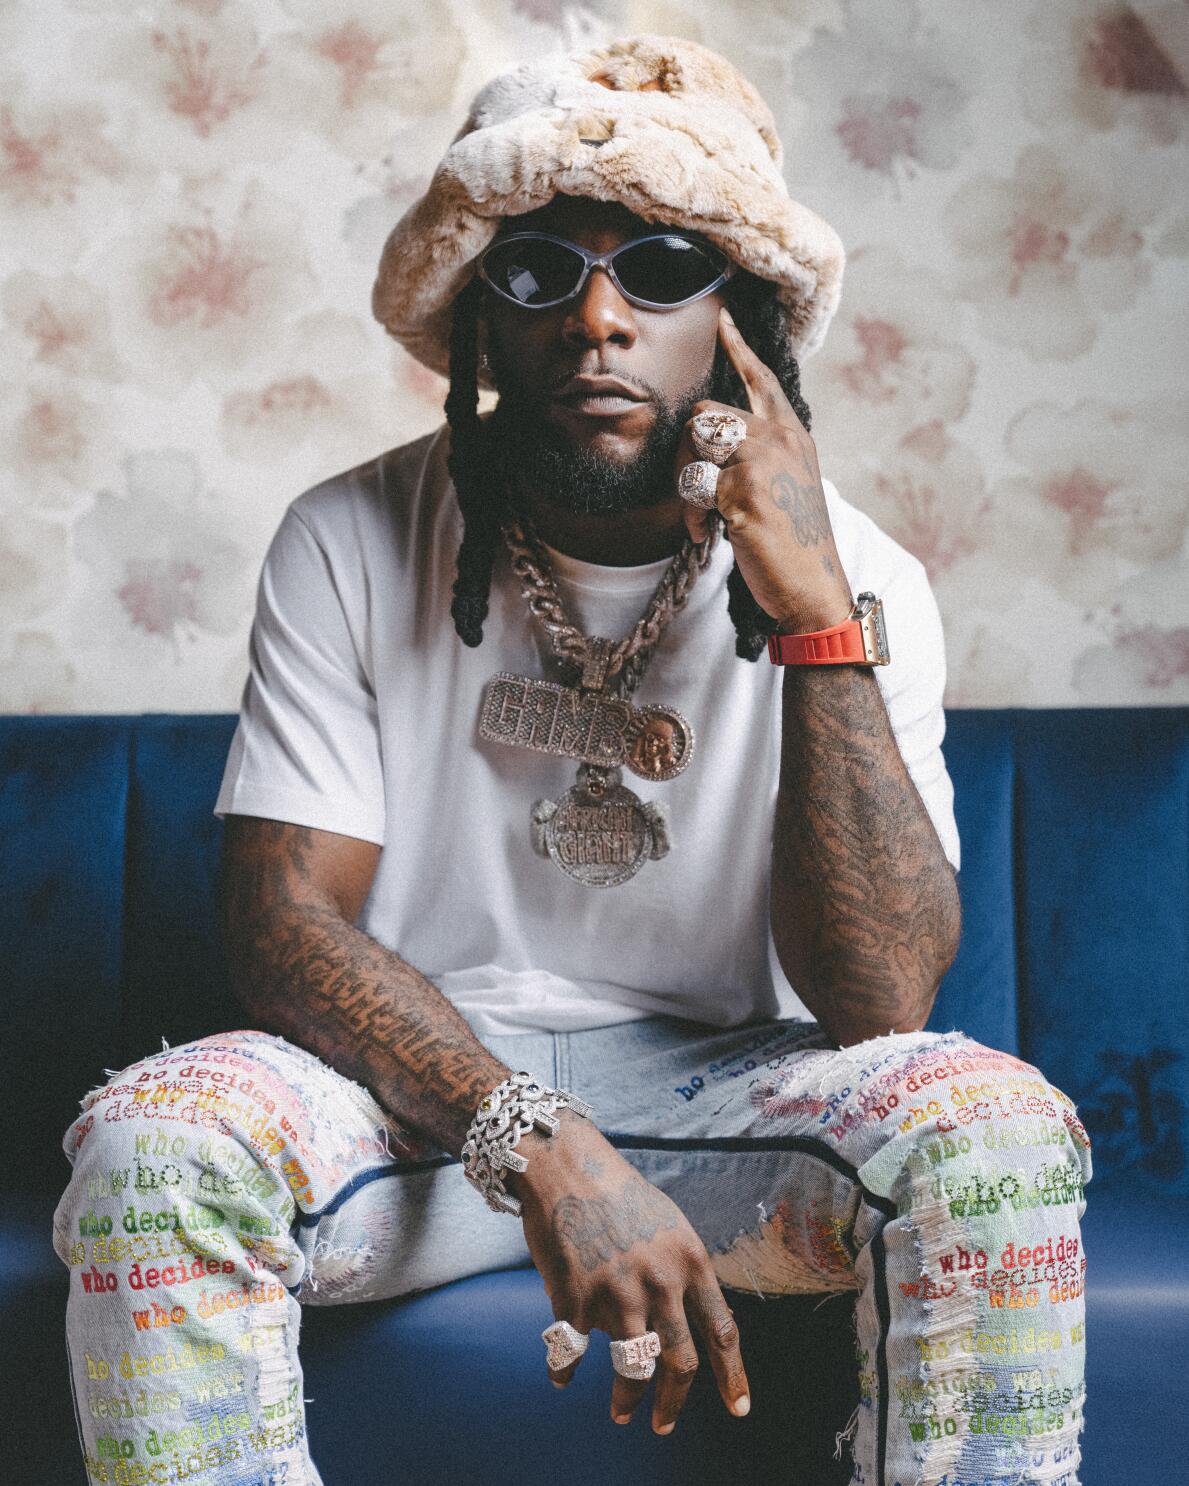 "If I was on Twitter, everywhere would be shaking everyday" - Burna boy reveals why he was restricted from his Twitter account